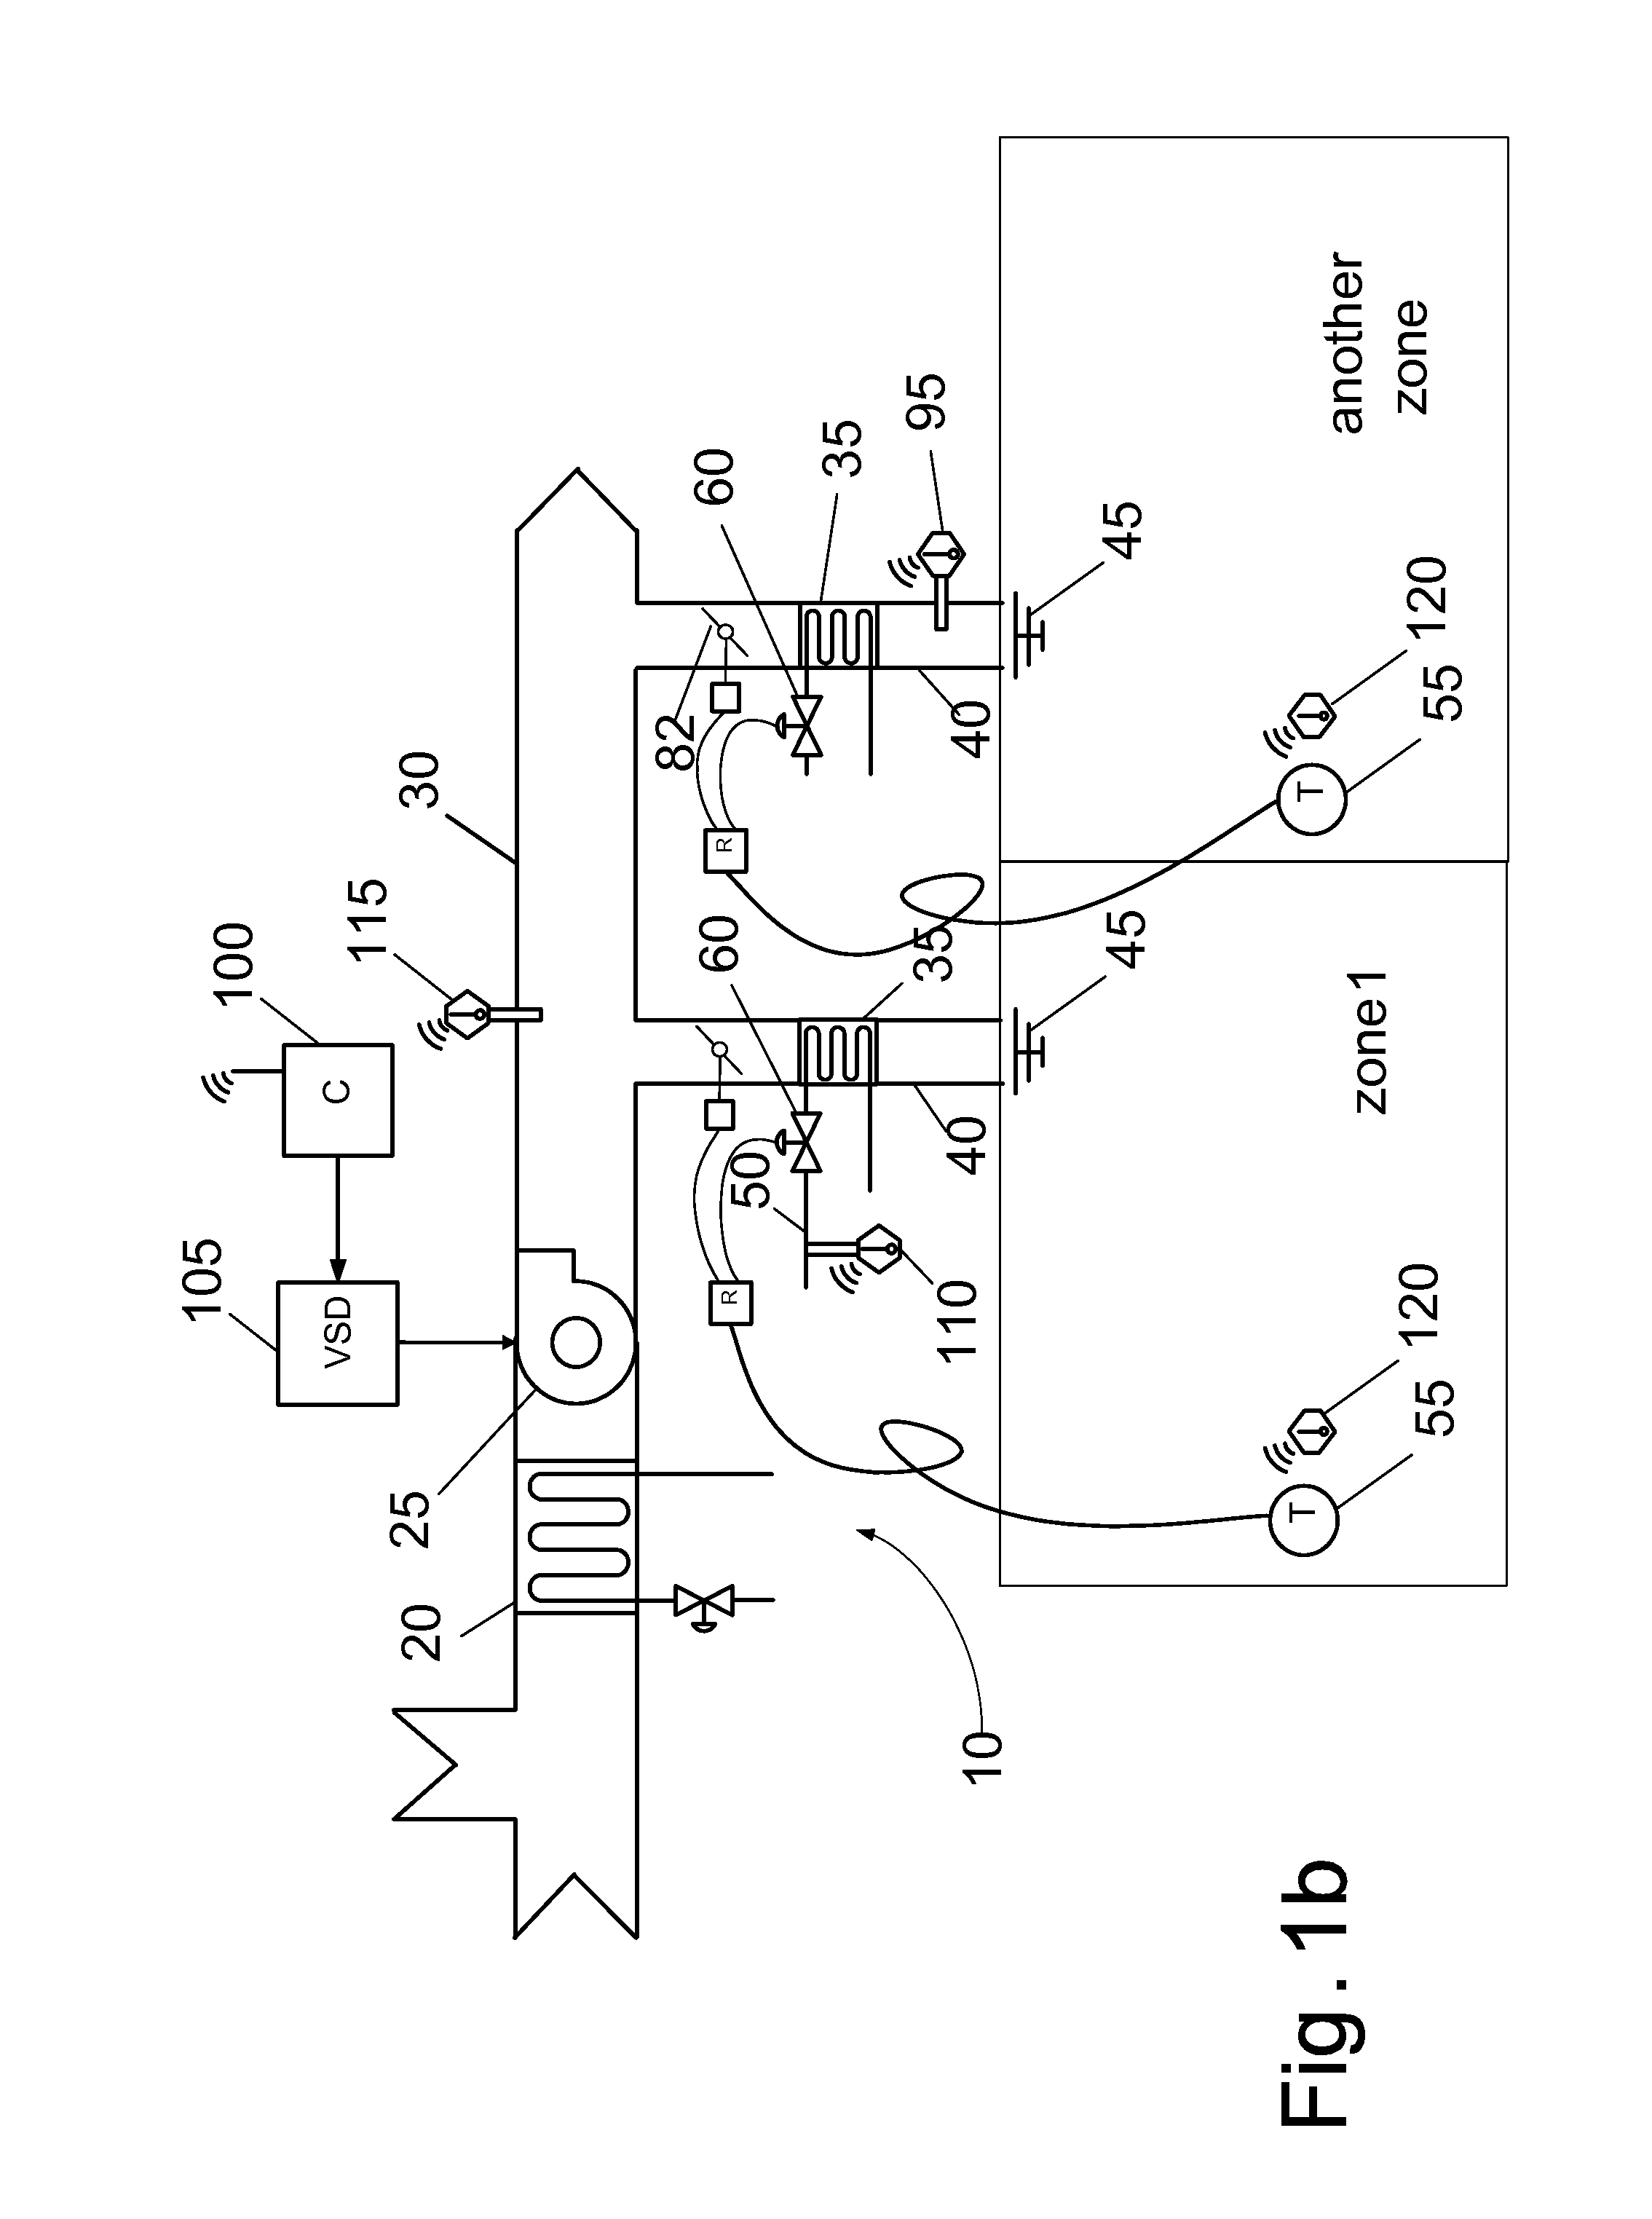 Method and apparatus for controlling fans in heating, ventilating, and air-conditioning systems